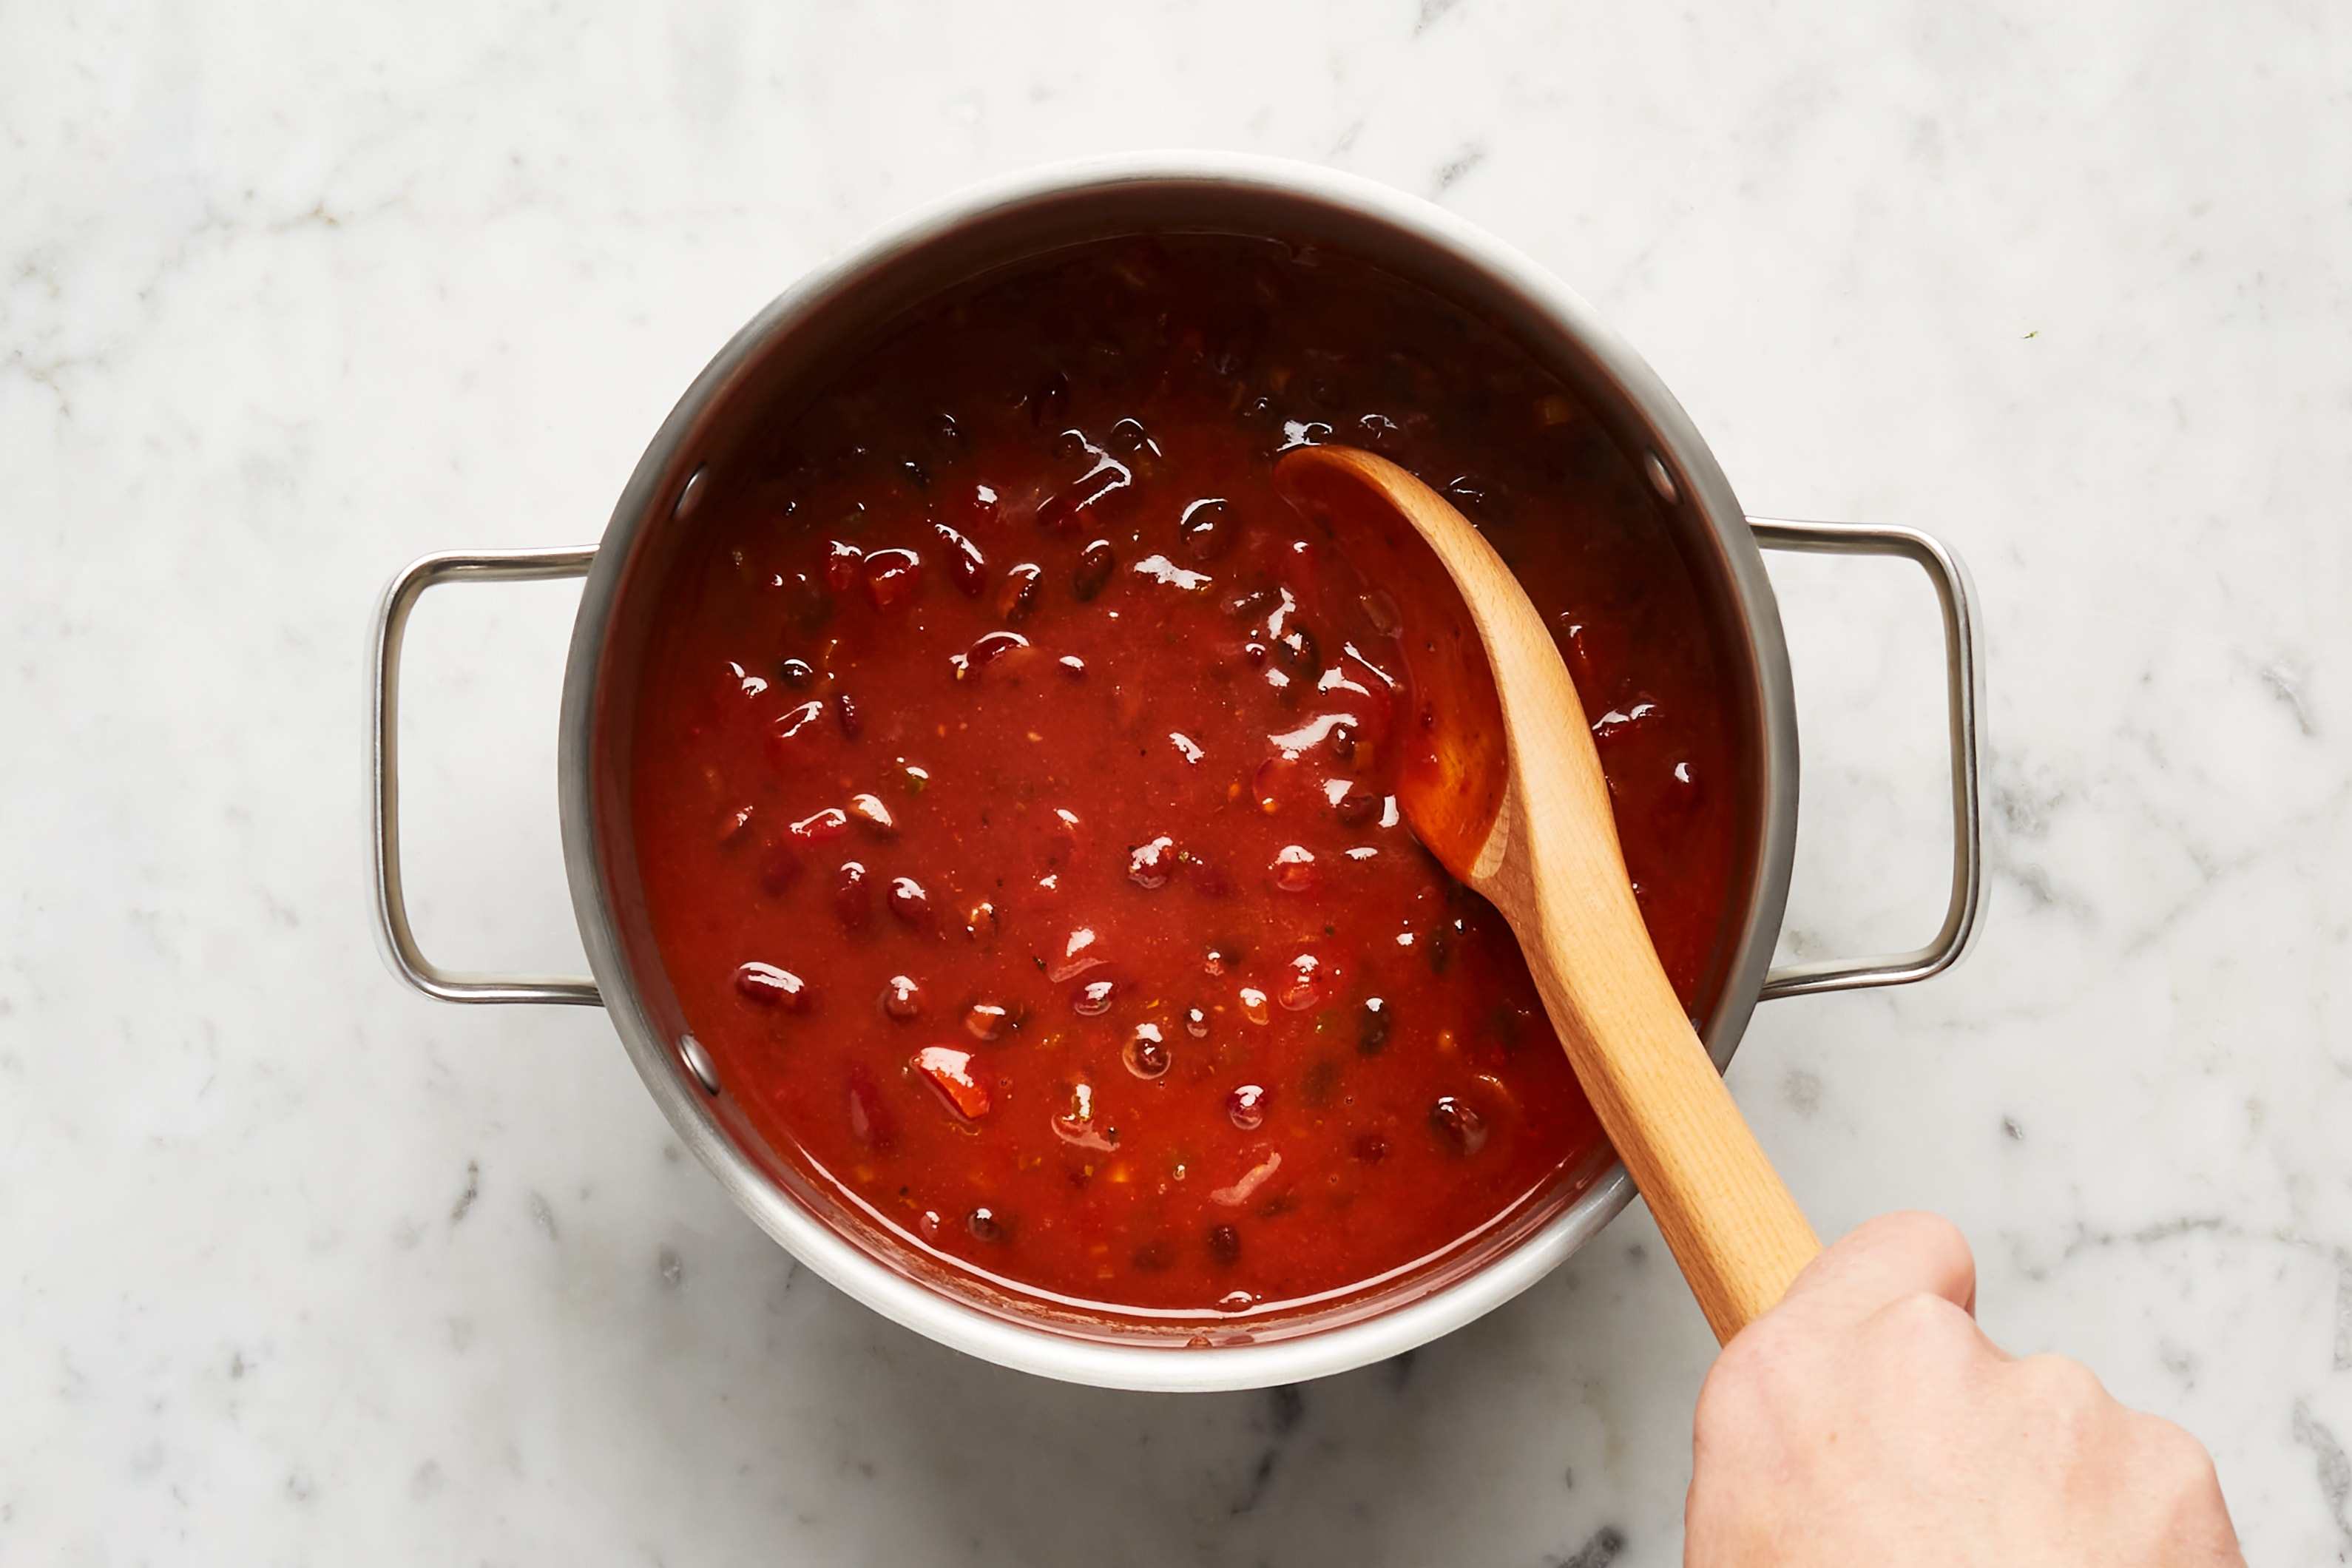 How Long Does It Take To Cook Chili on the Stovetop?